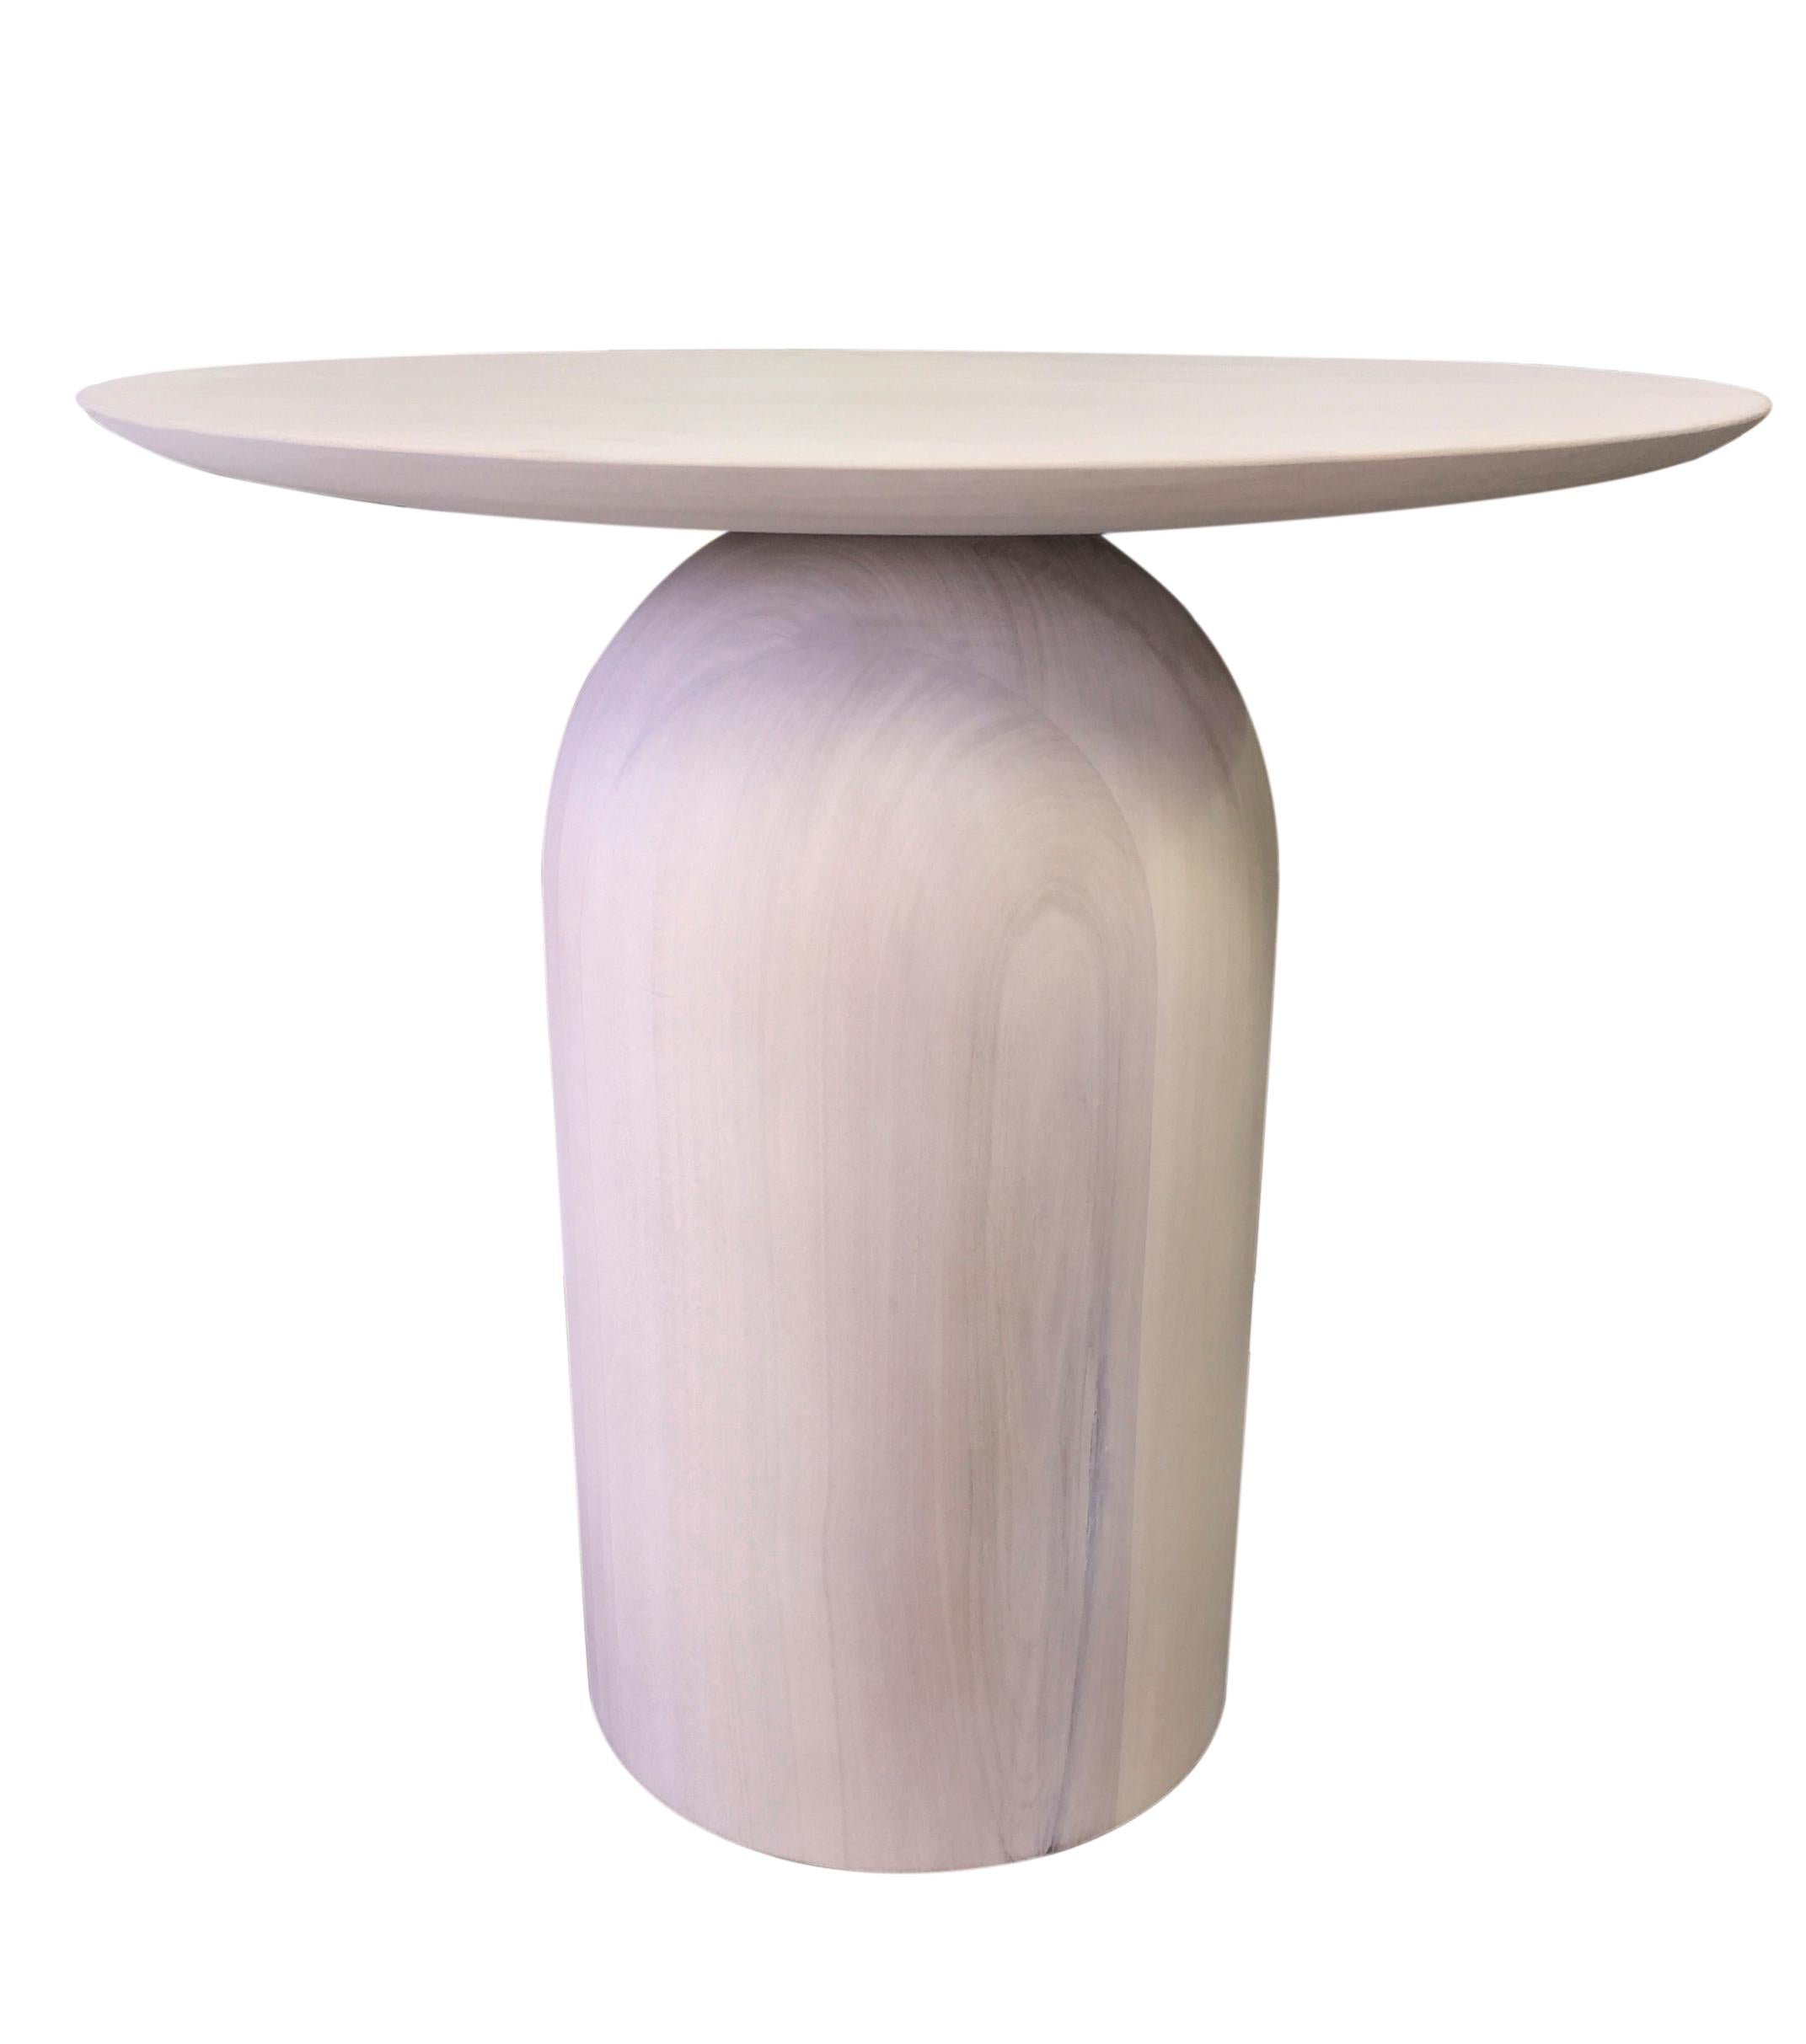 This original sculptural, solid wood round top EGG side table is a refined example of artisanal 21st century organic design. Its minimal shape, reminiscent of Brancusi and Arp sculptures, works equally well in contemporary or updated period spaces. 